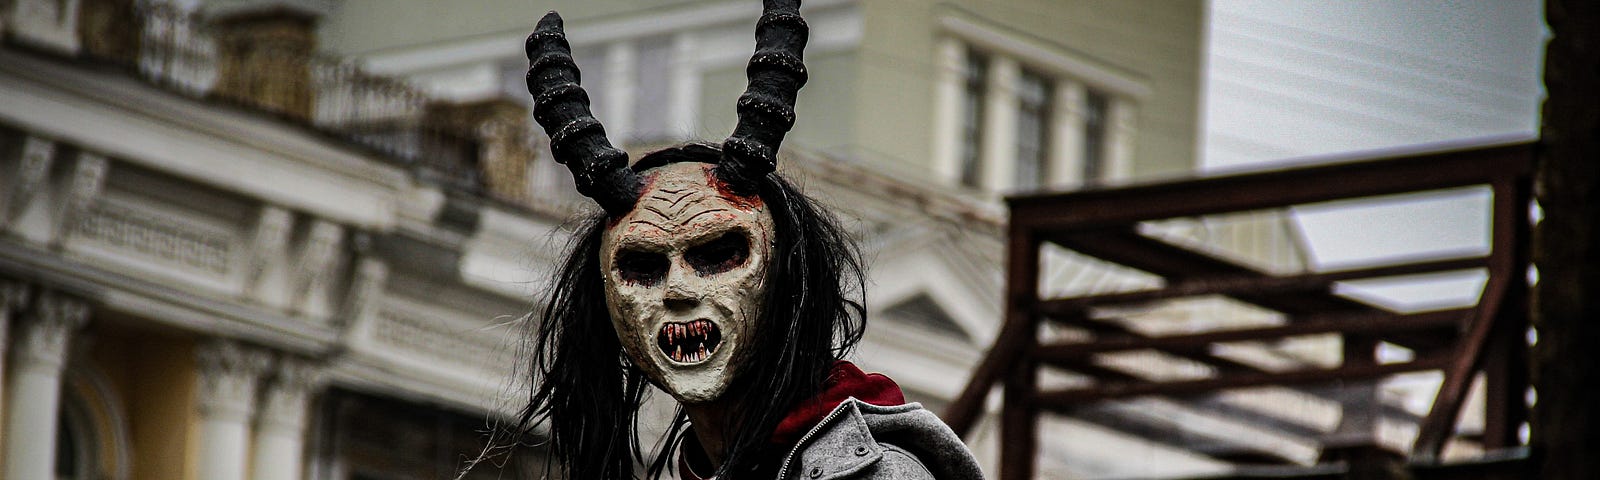 A man outdoors wearing a fright mask with horns.